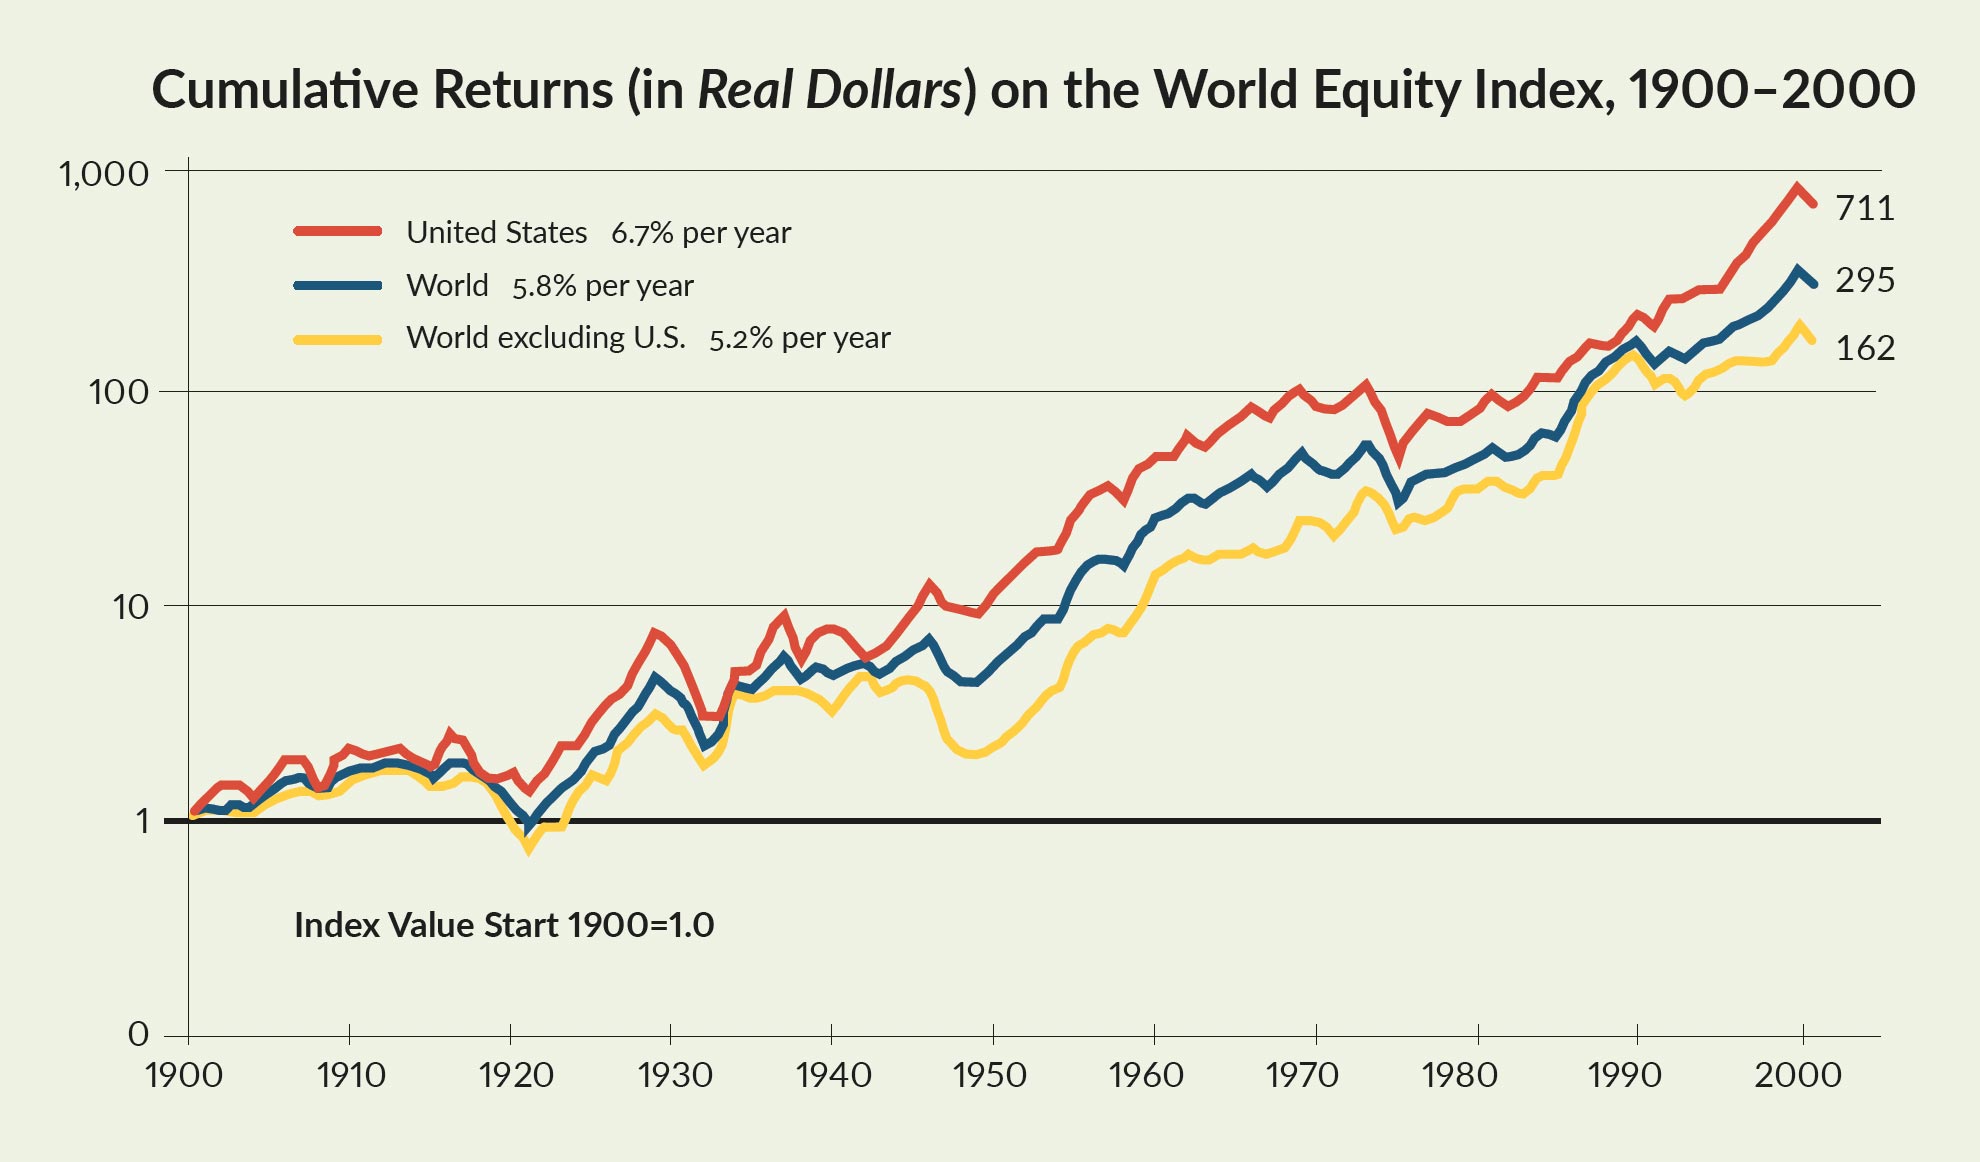 Cumulative Returns (in Real Dollars) on the World Equity Index, 1900-2000